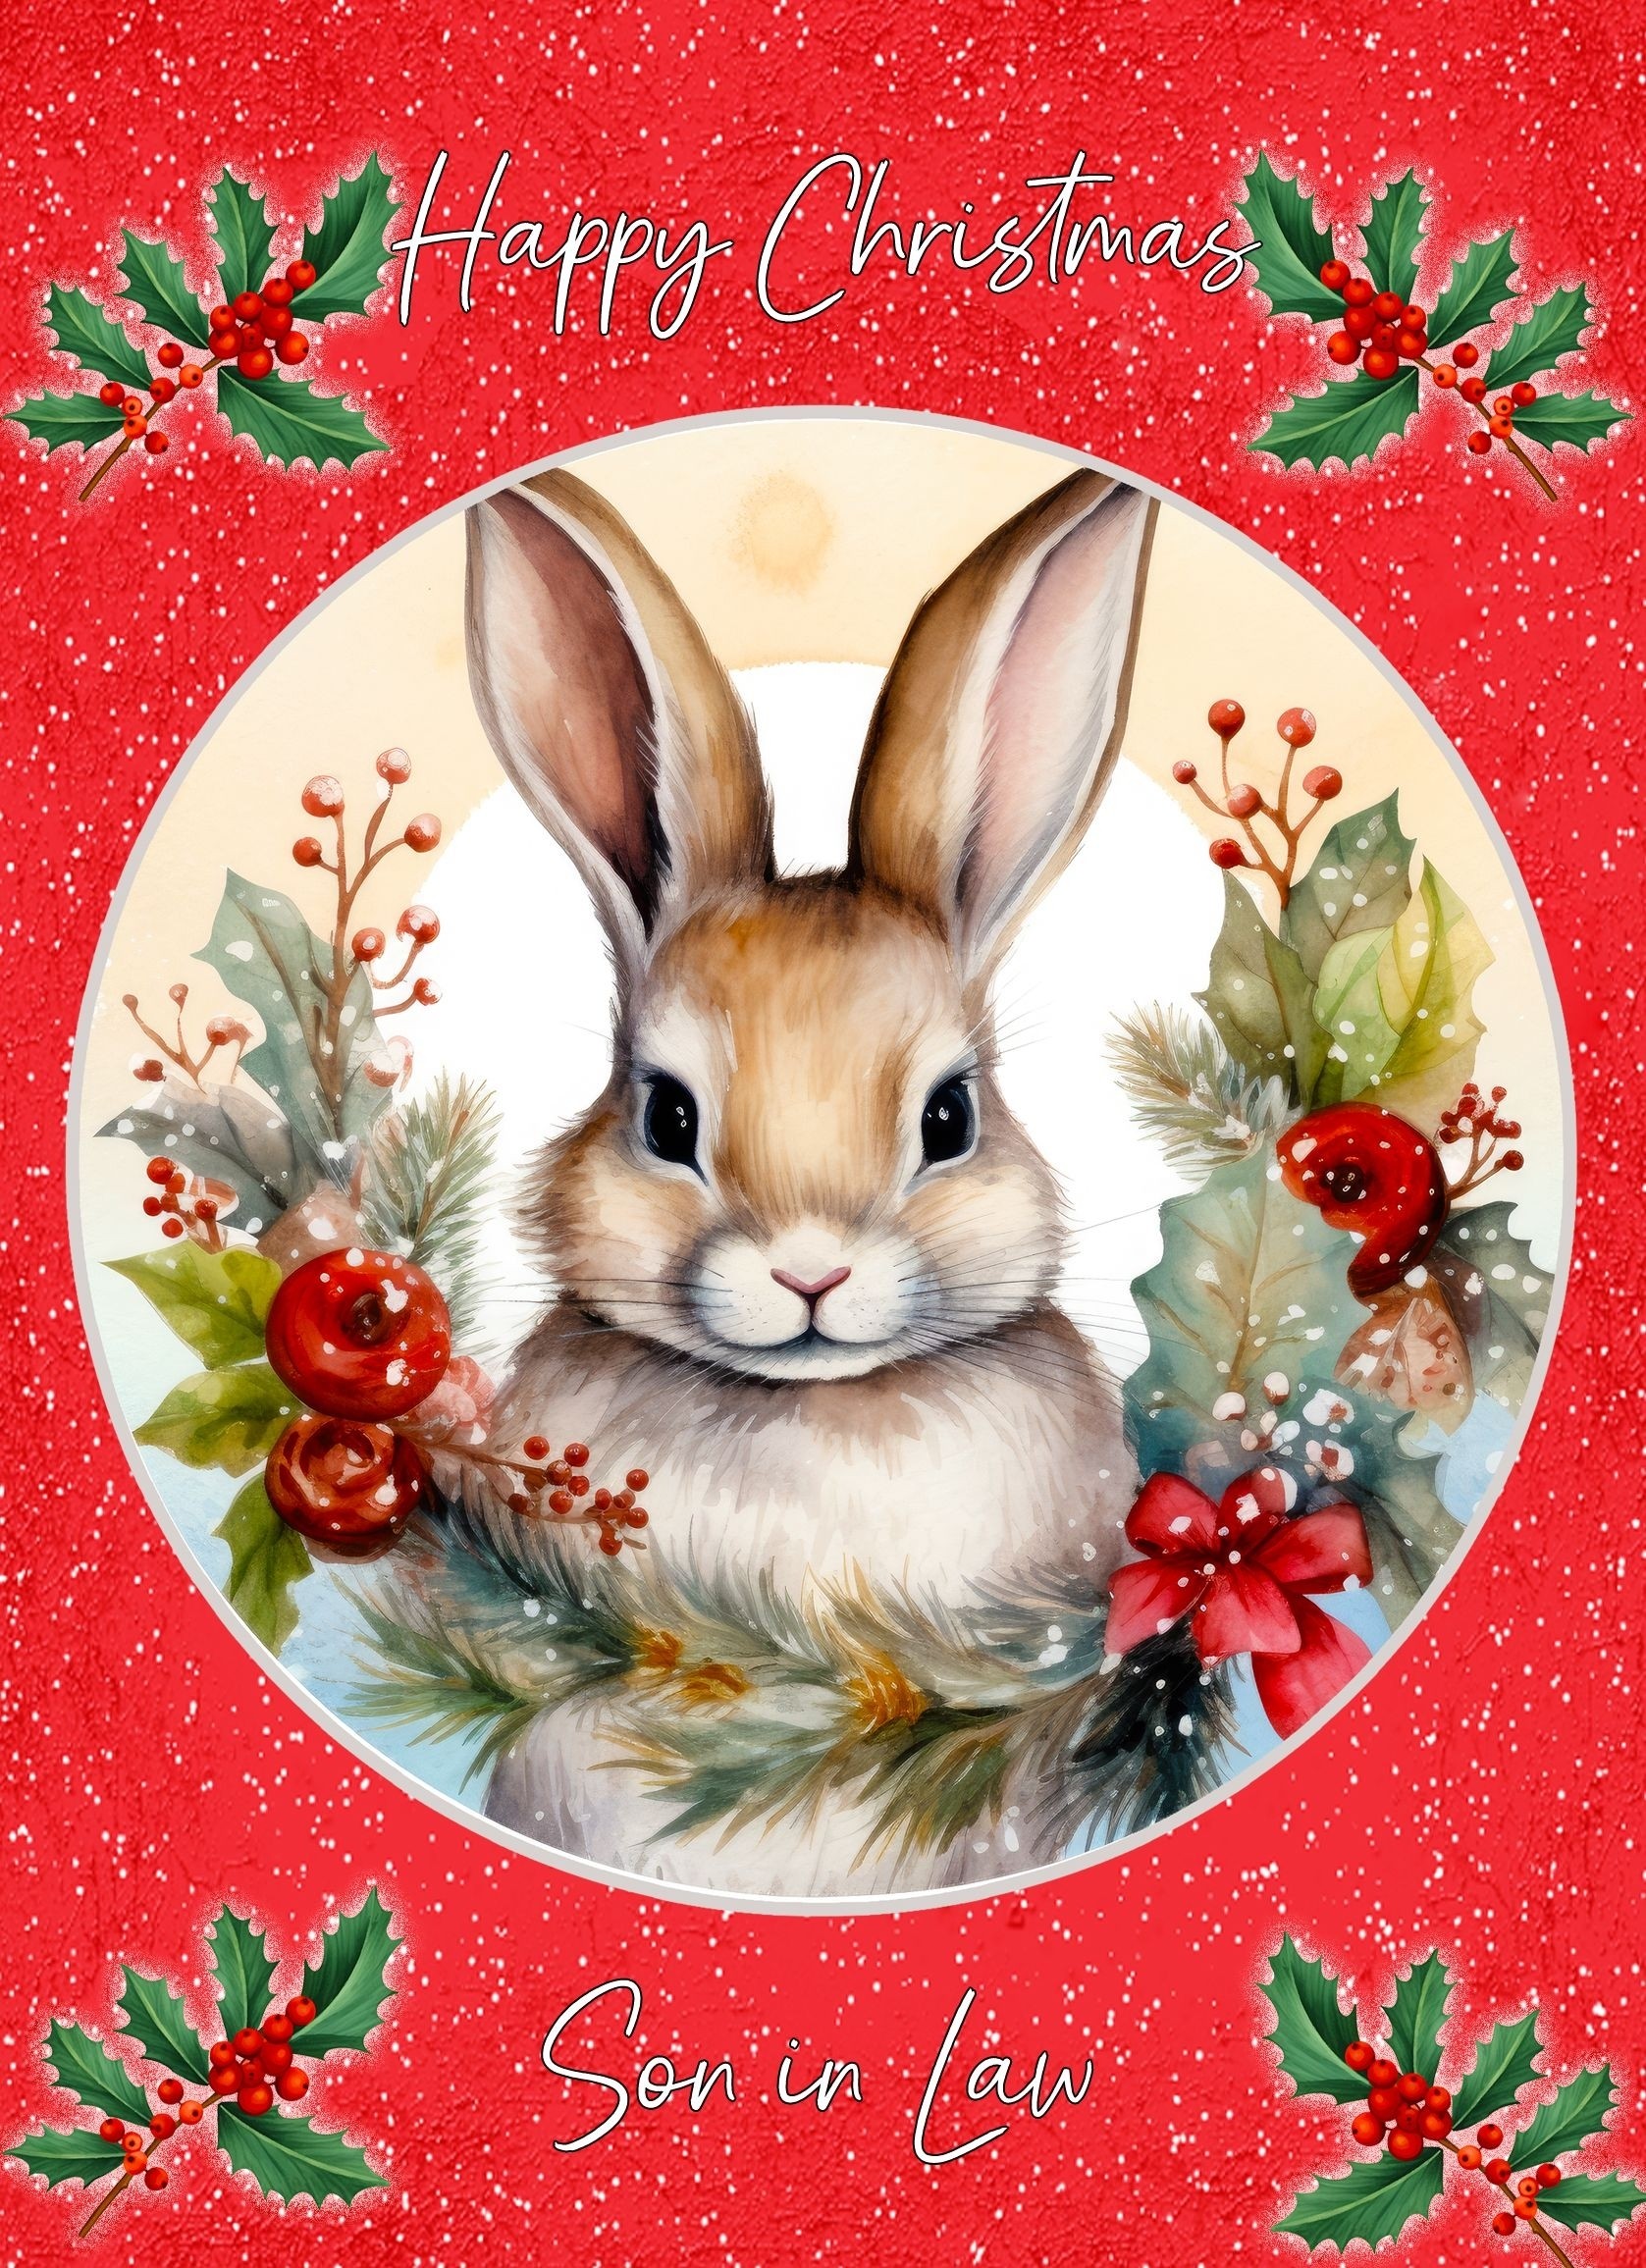 Christmas Card For Son in Law (Globe, Rabbit)